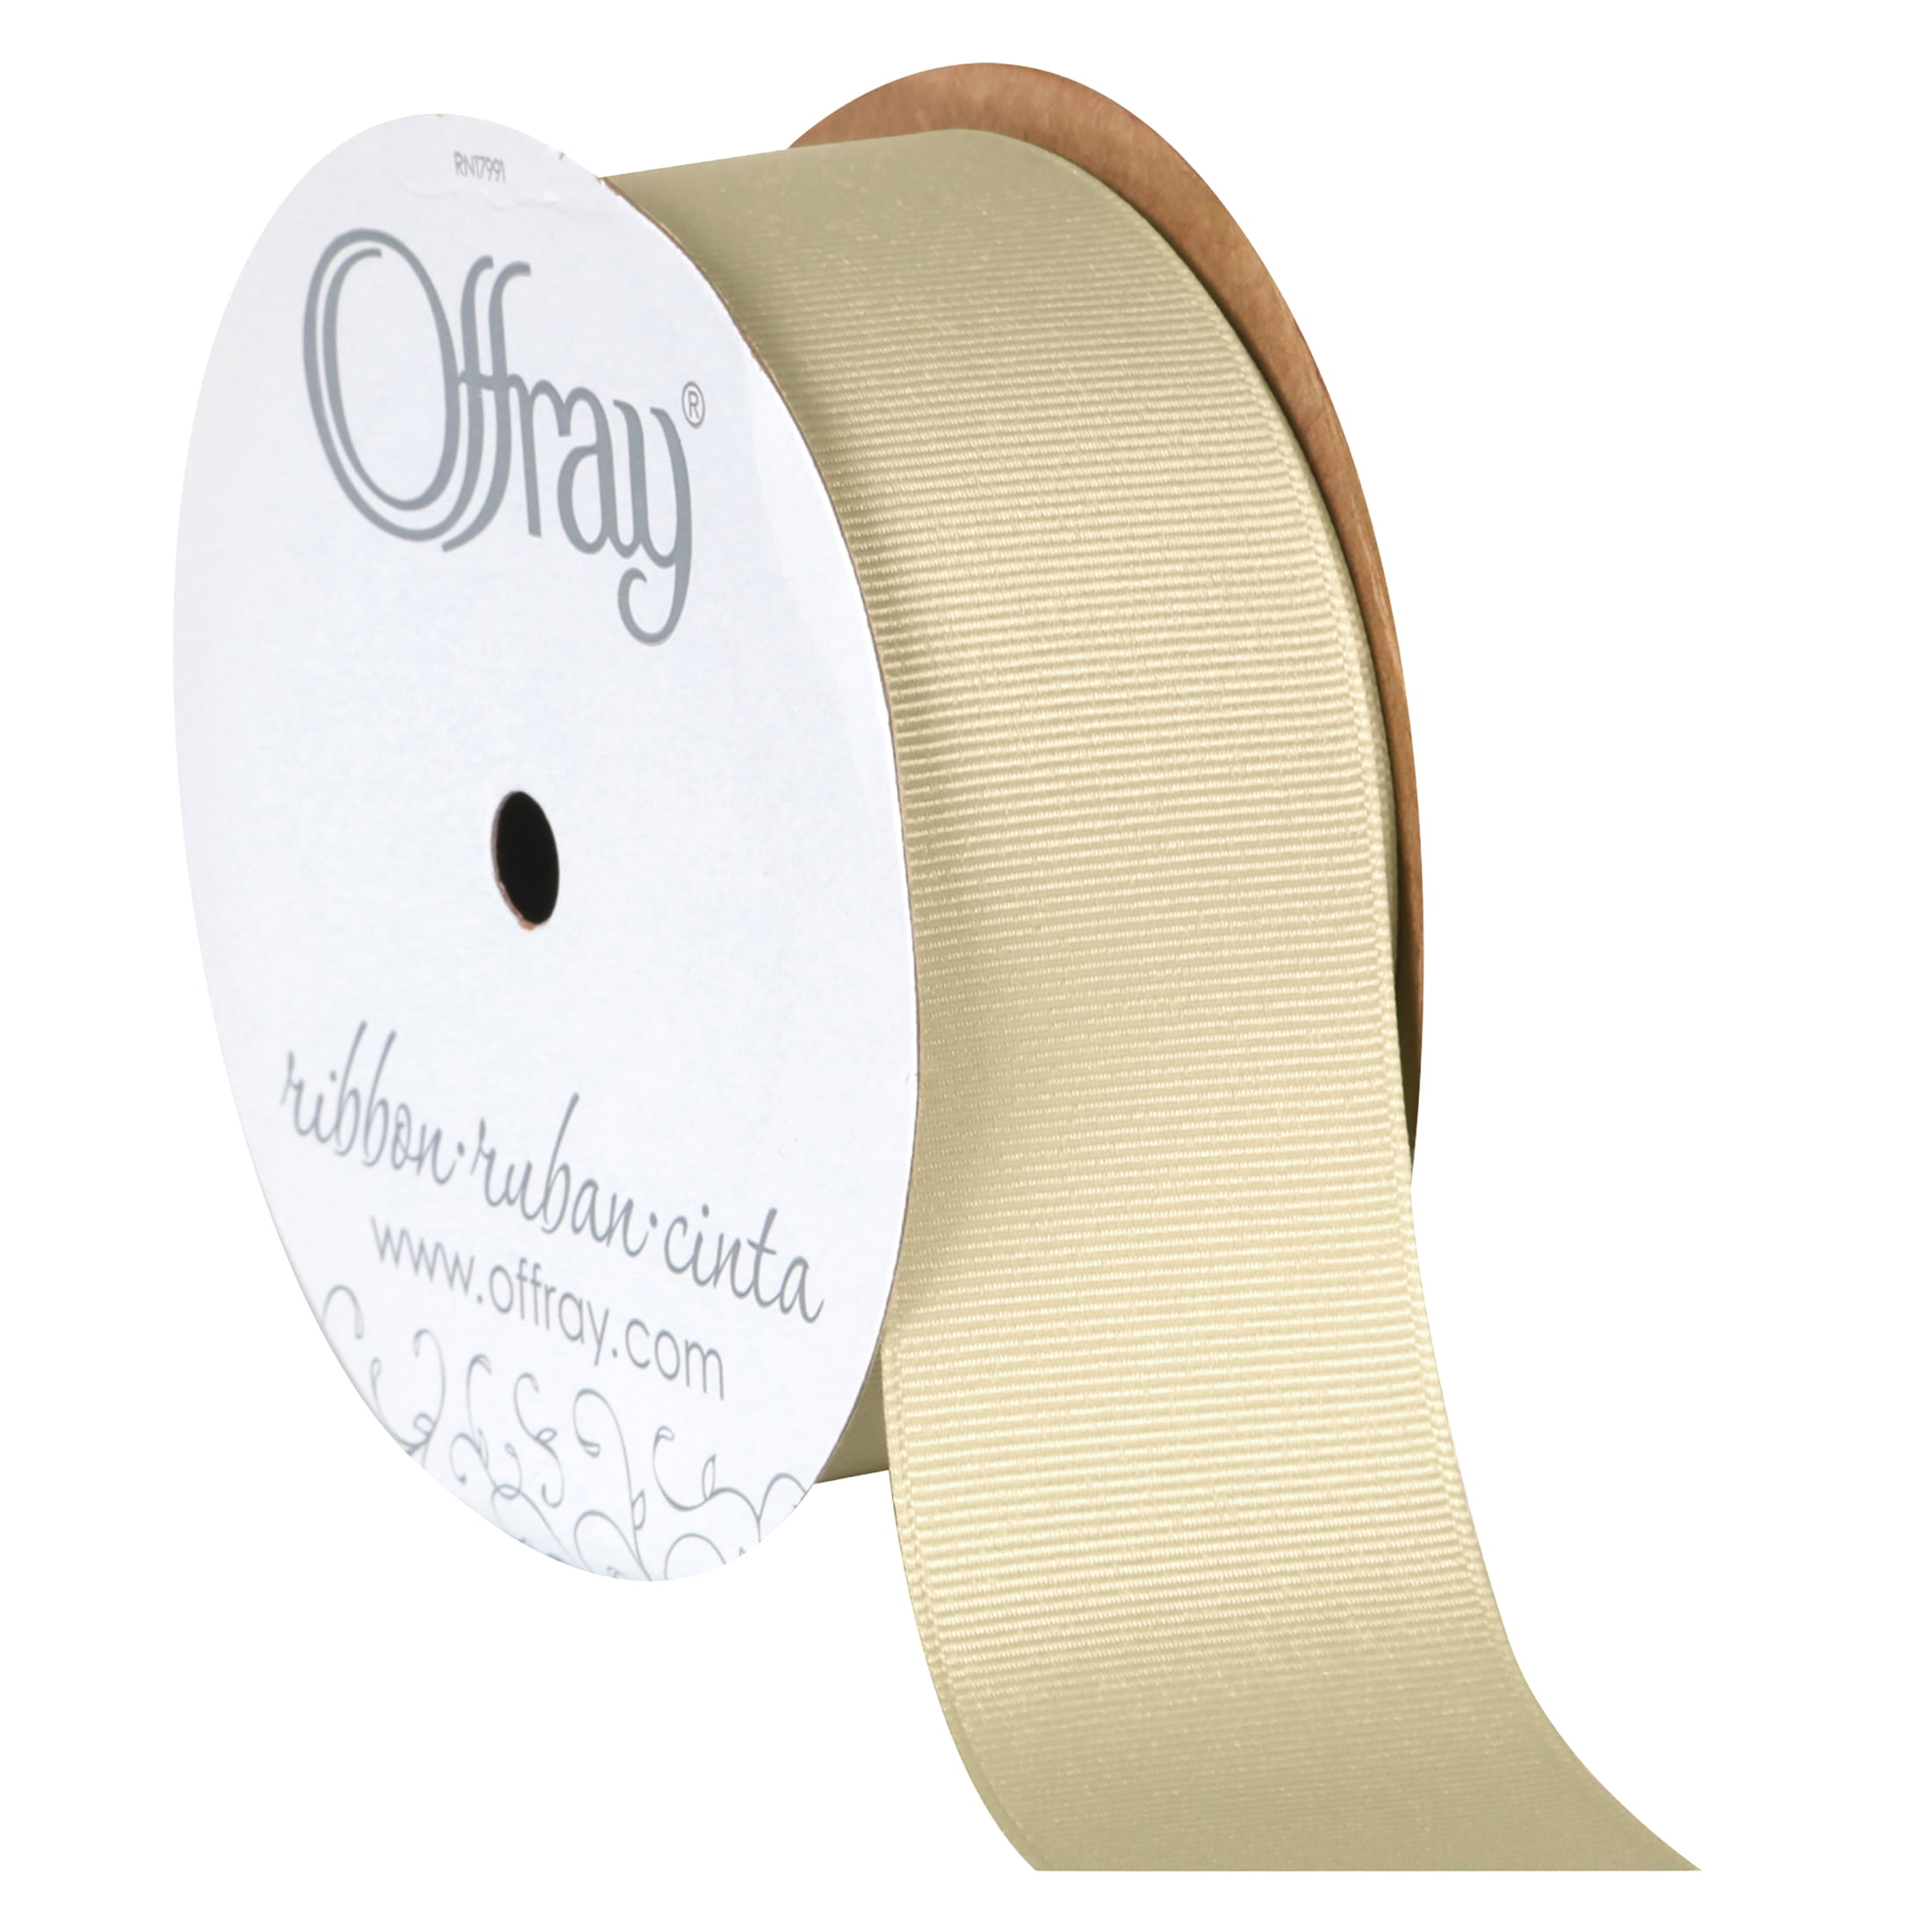 13mm Wide Cream Satin Ribbon 10 METER ROLL of Narrow Double Faced Satin  Ribbon 1/2 Inch Wide 